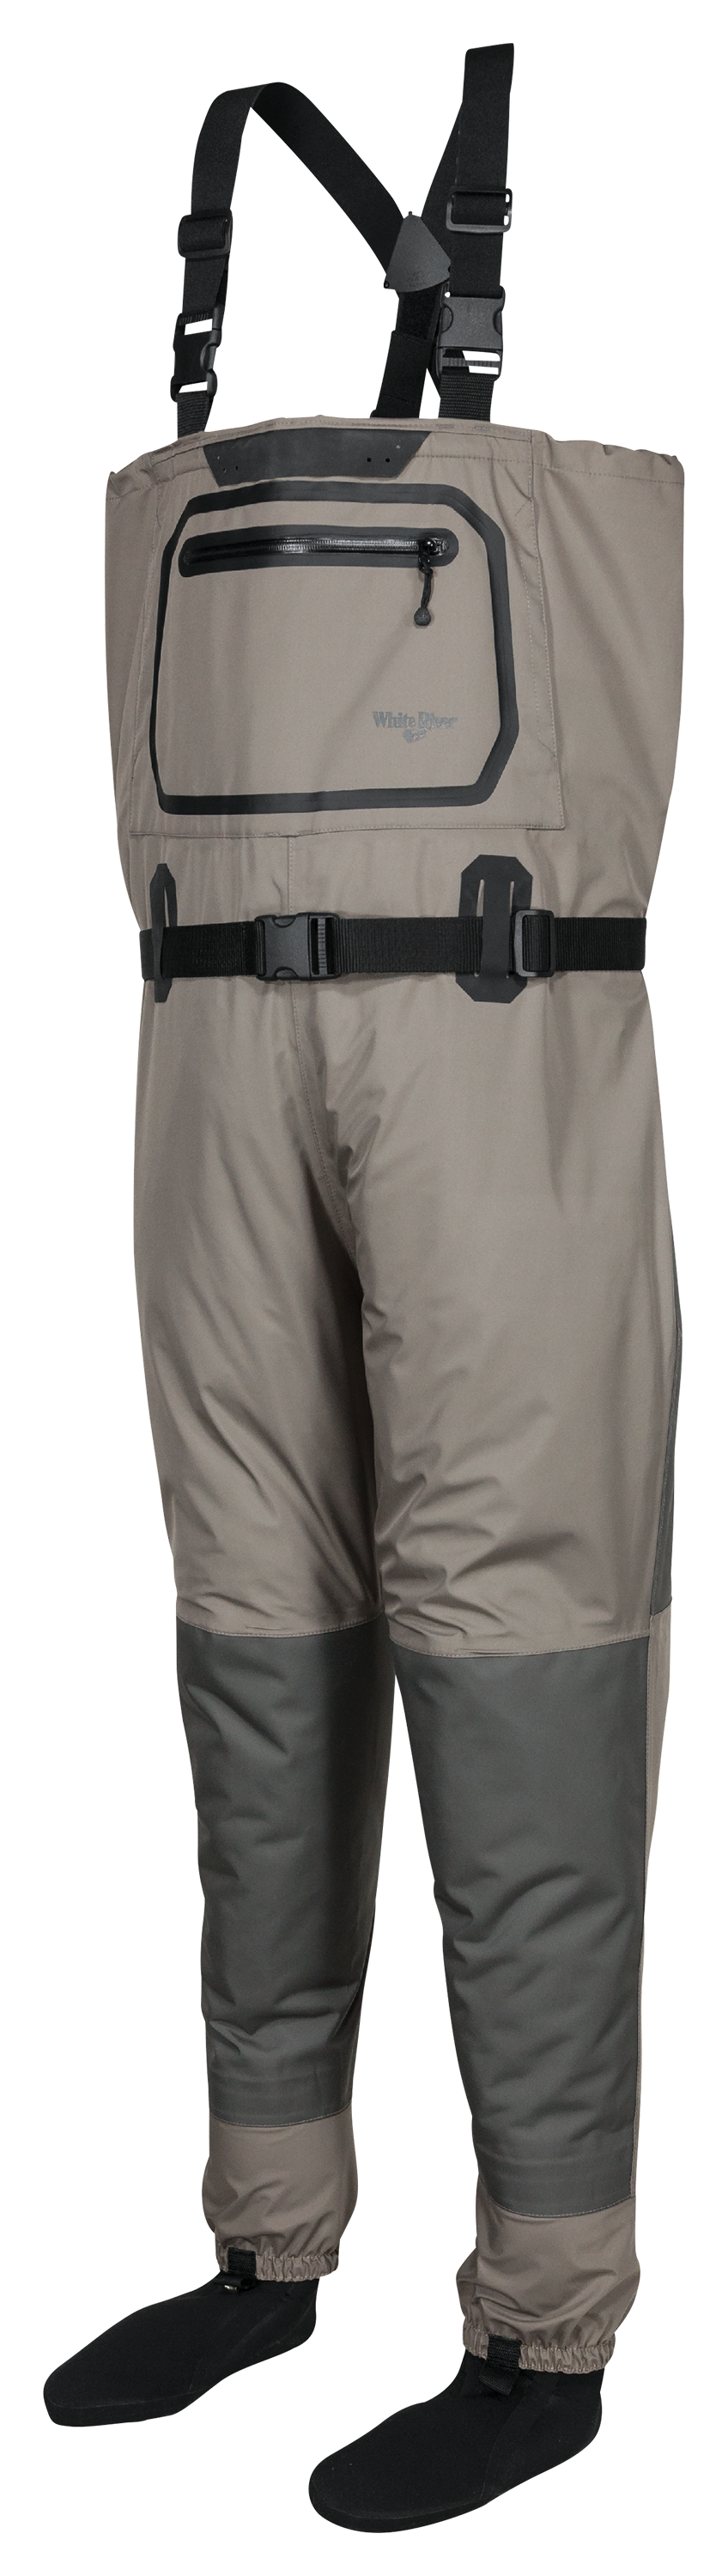 White River Fly Shop Osprey II Stocking-Foot Breathable Waders for